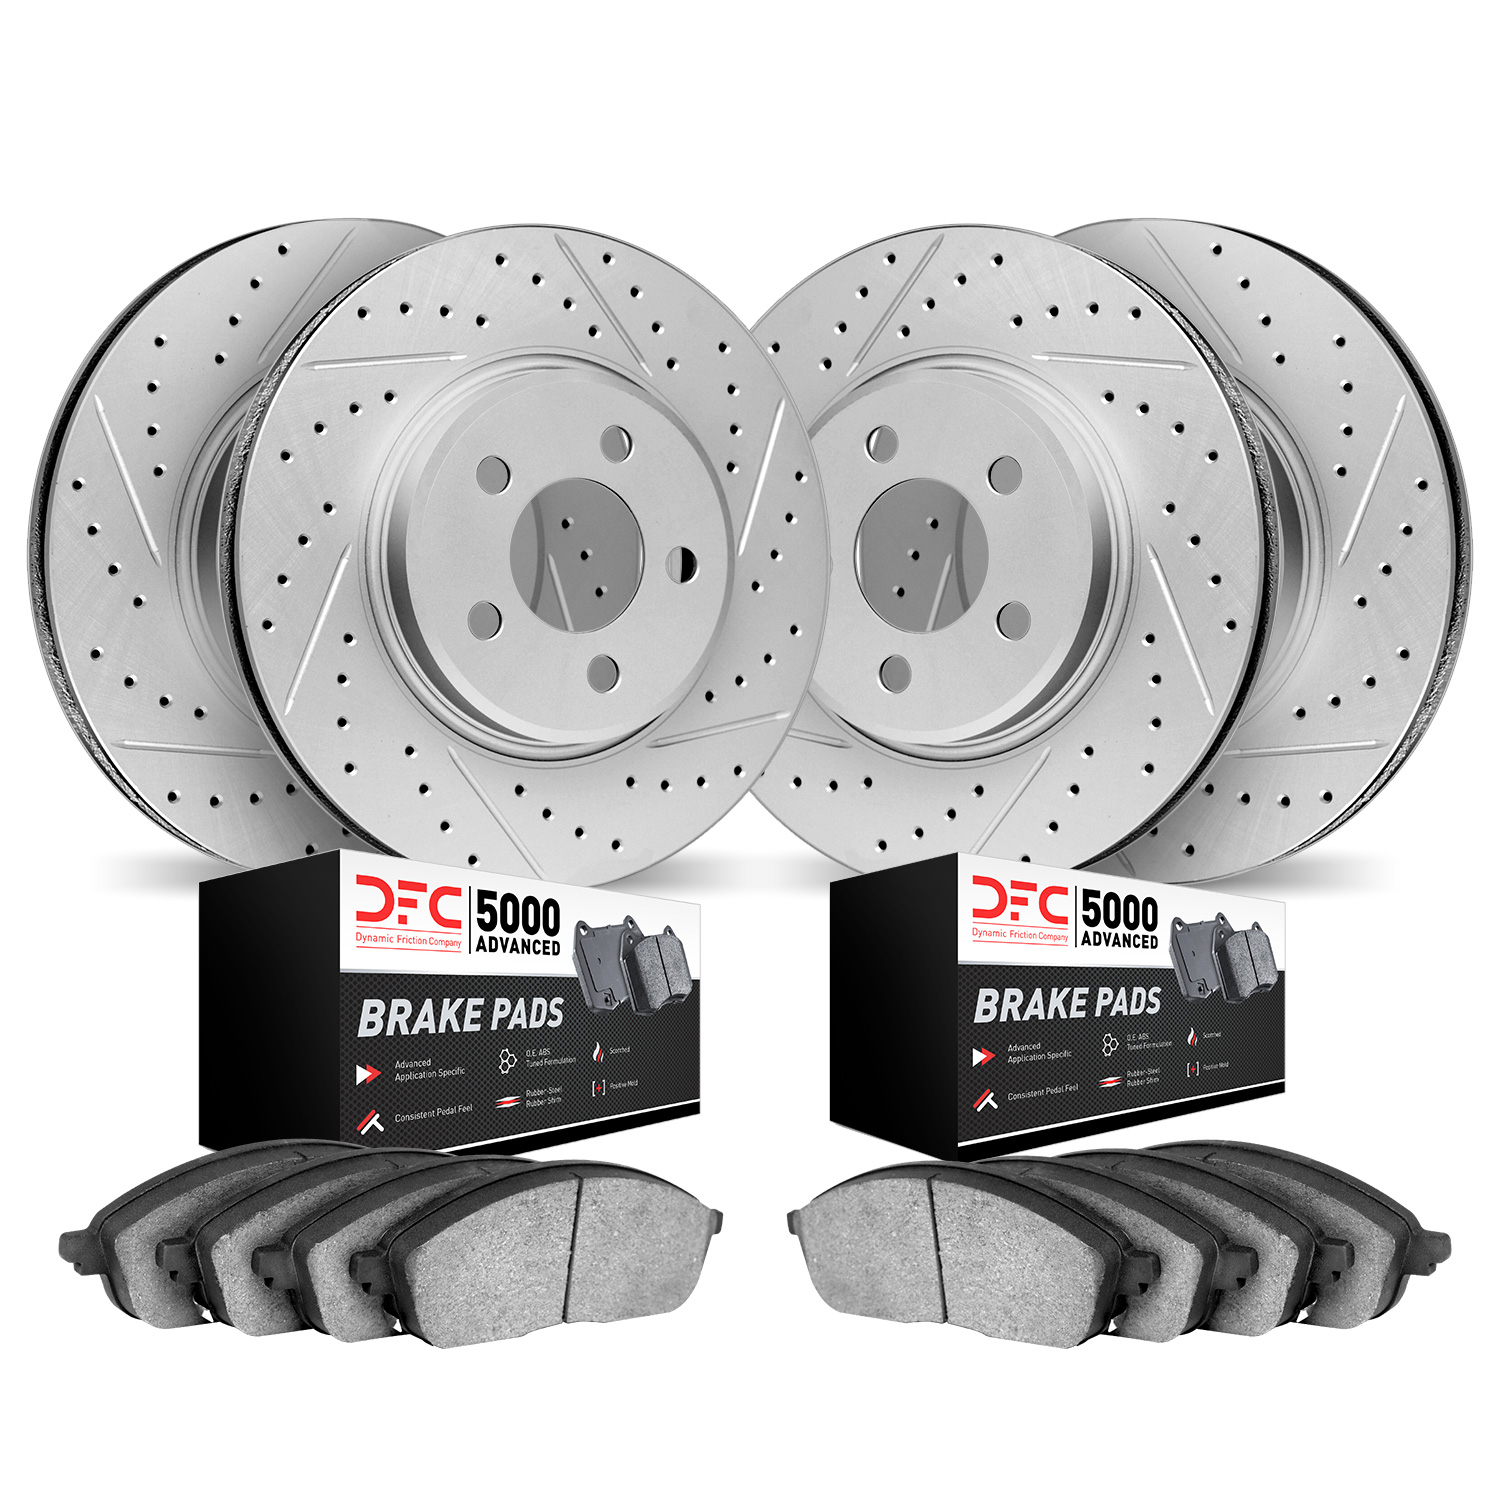 2504-20000 Geoperformance Drilled/Slotted Rotors w/5000 Advanced Brake Pads Kit, 1998-2003 Jaguar, Position: Front and Rear